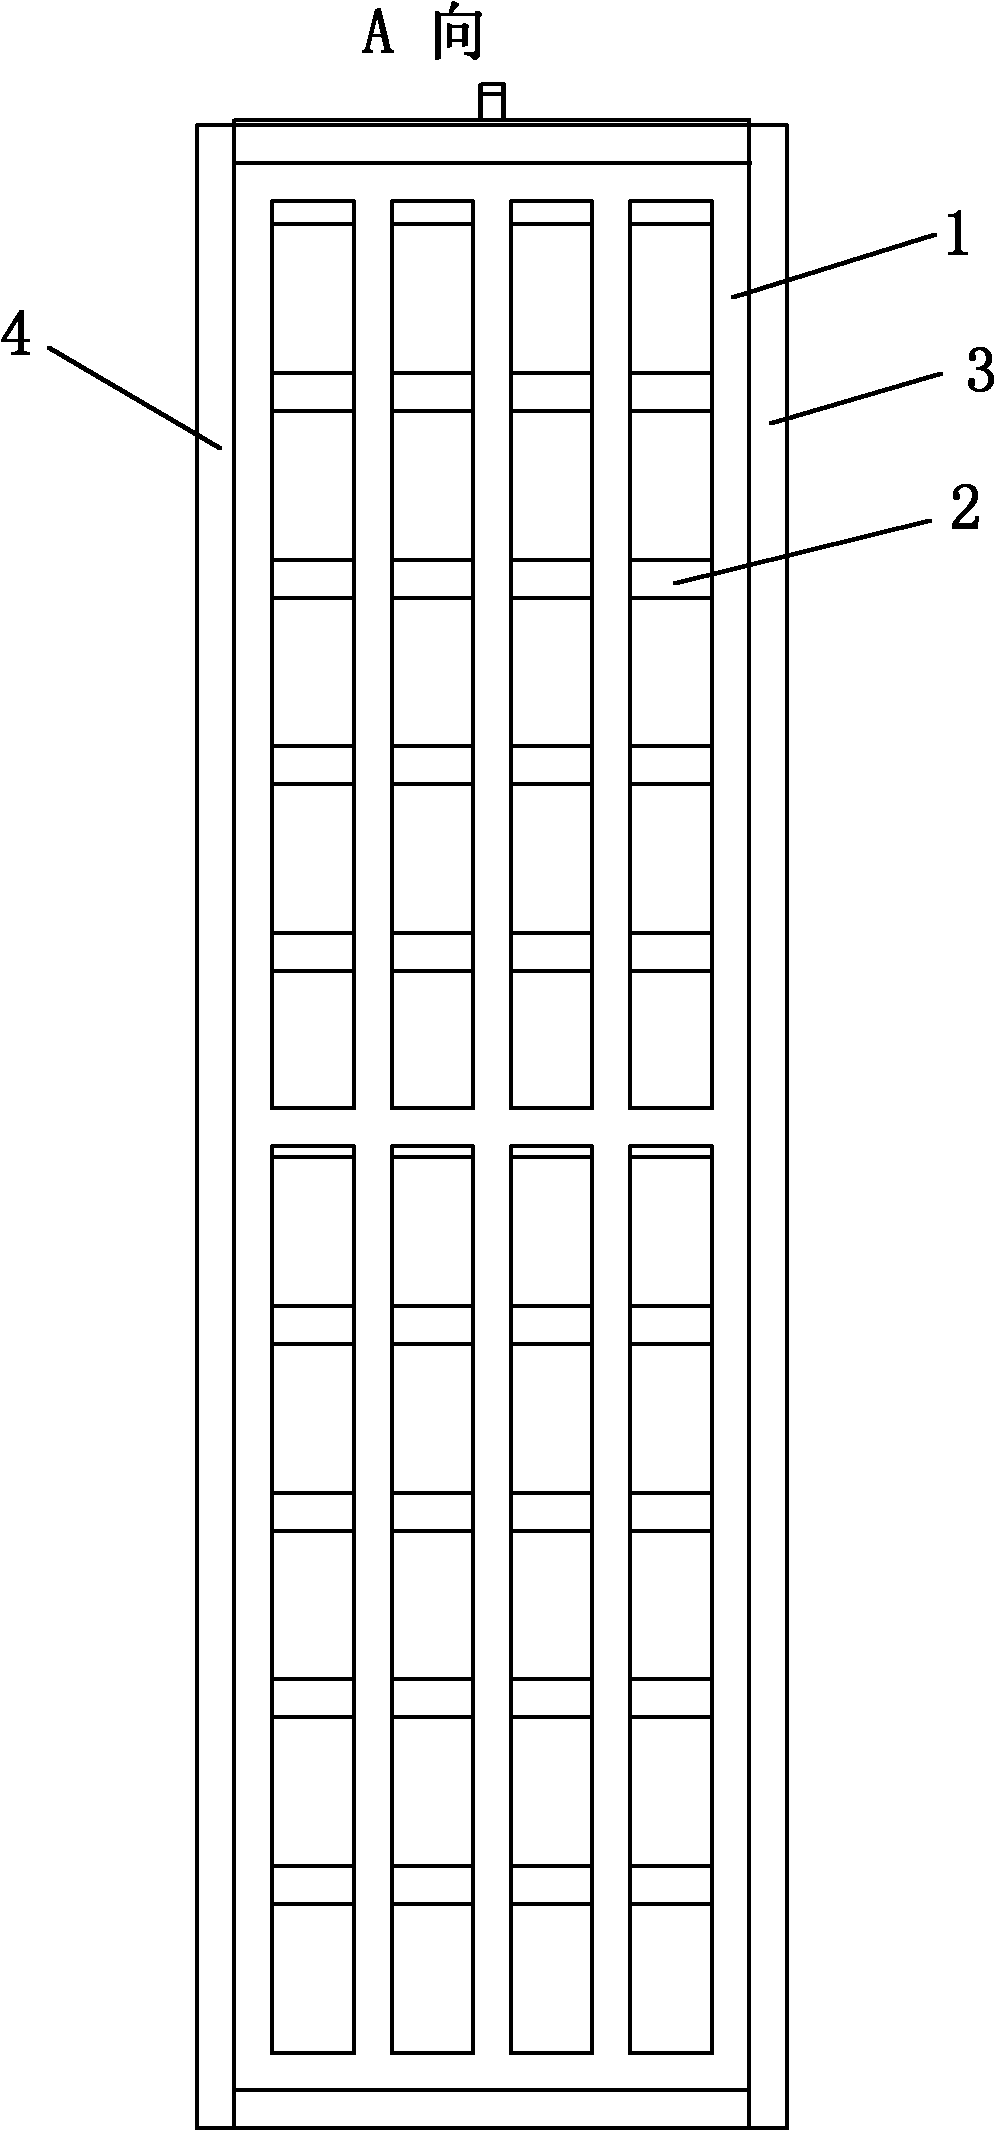 Double-purpose window with functions of theft resistance and escape